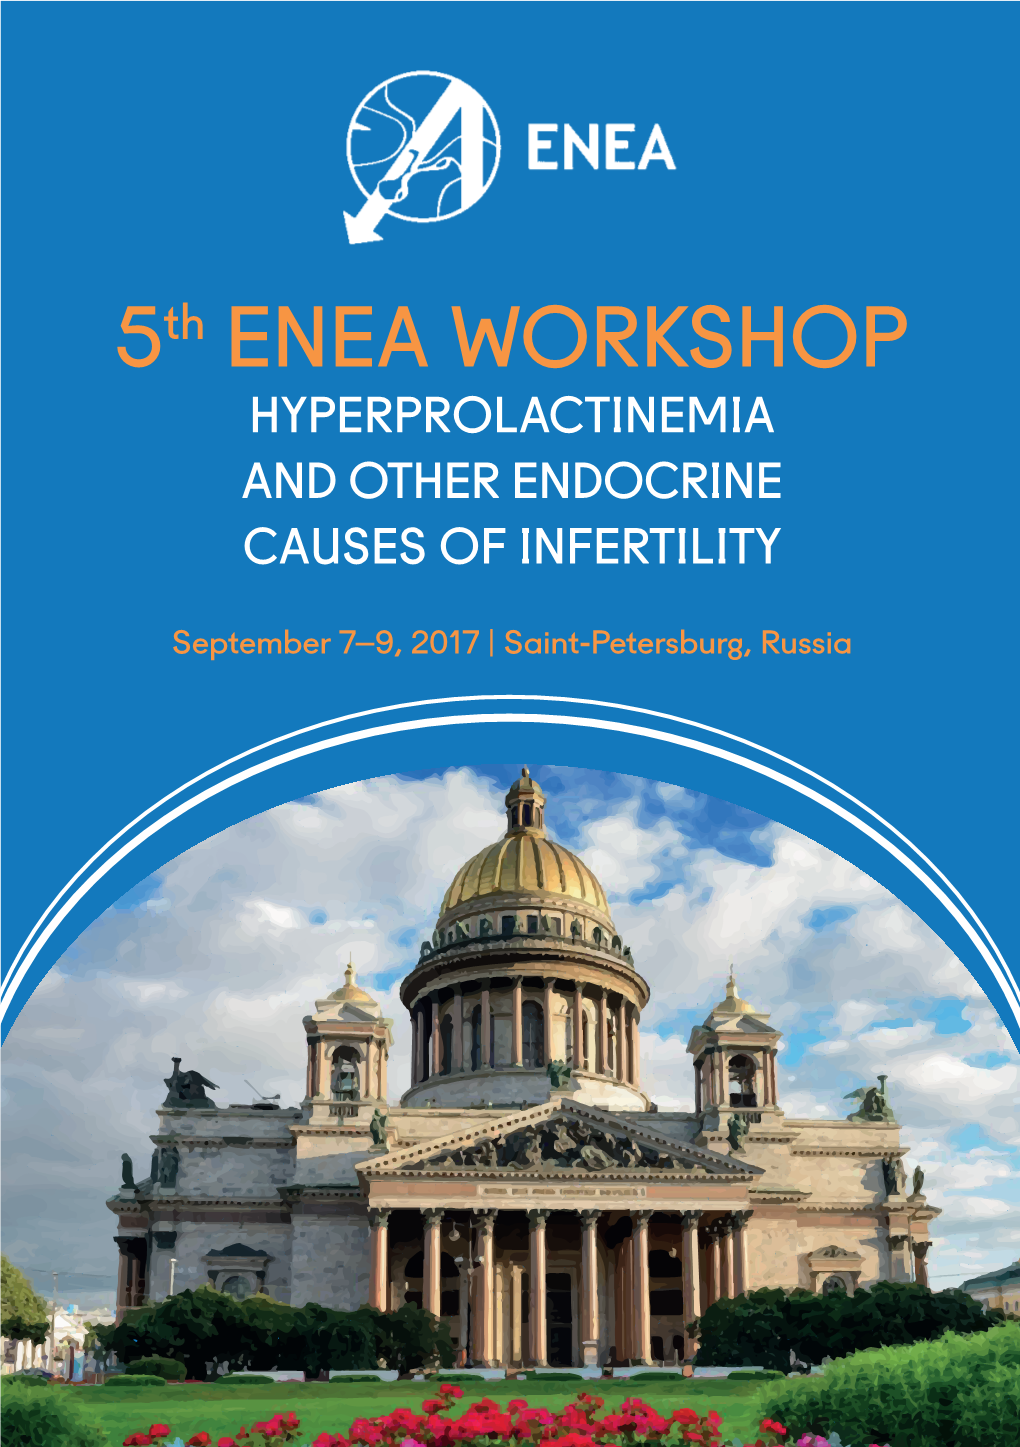 5Th ENEA WORKSHOP HYPERPROLACTINEMIA and OTHER ENDOCRINE CAUSES of INFERTILITY